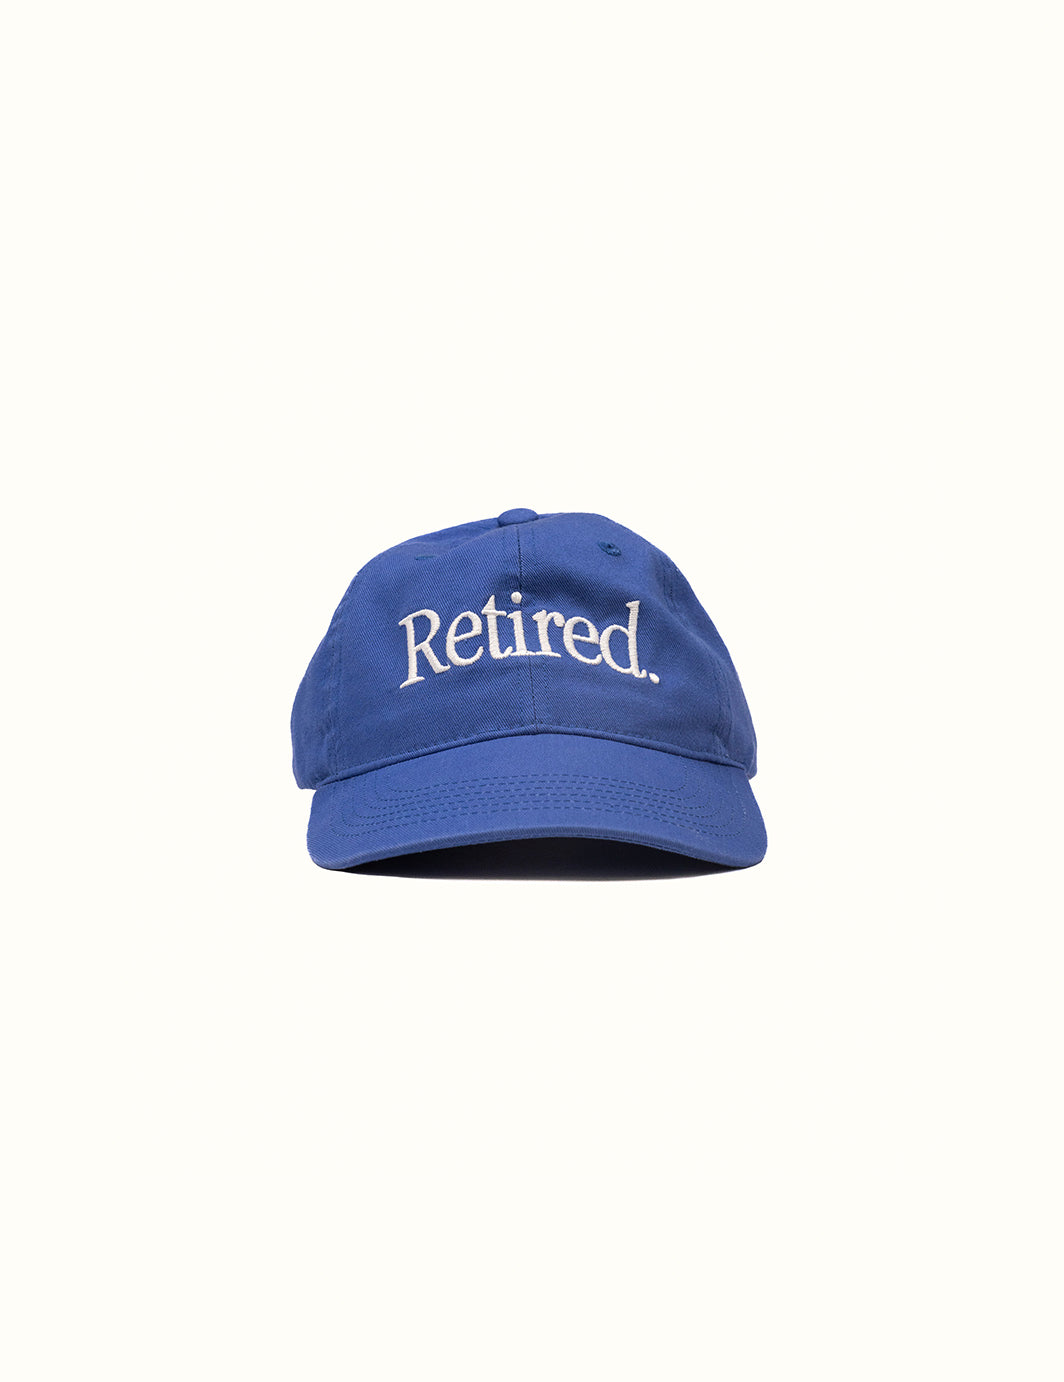 Retired Hat Blue (SP 24)